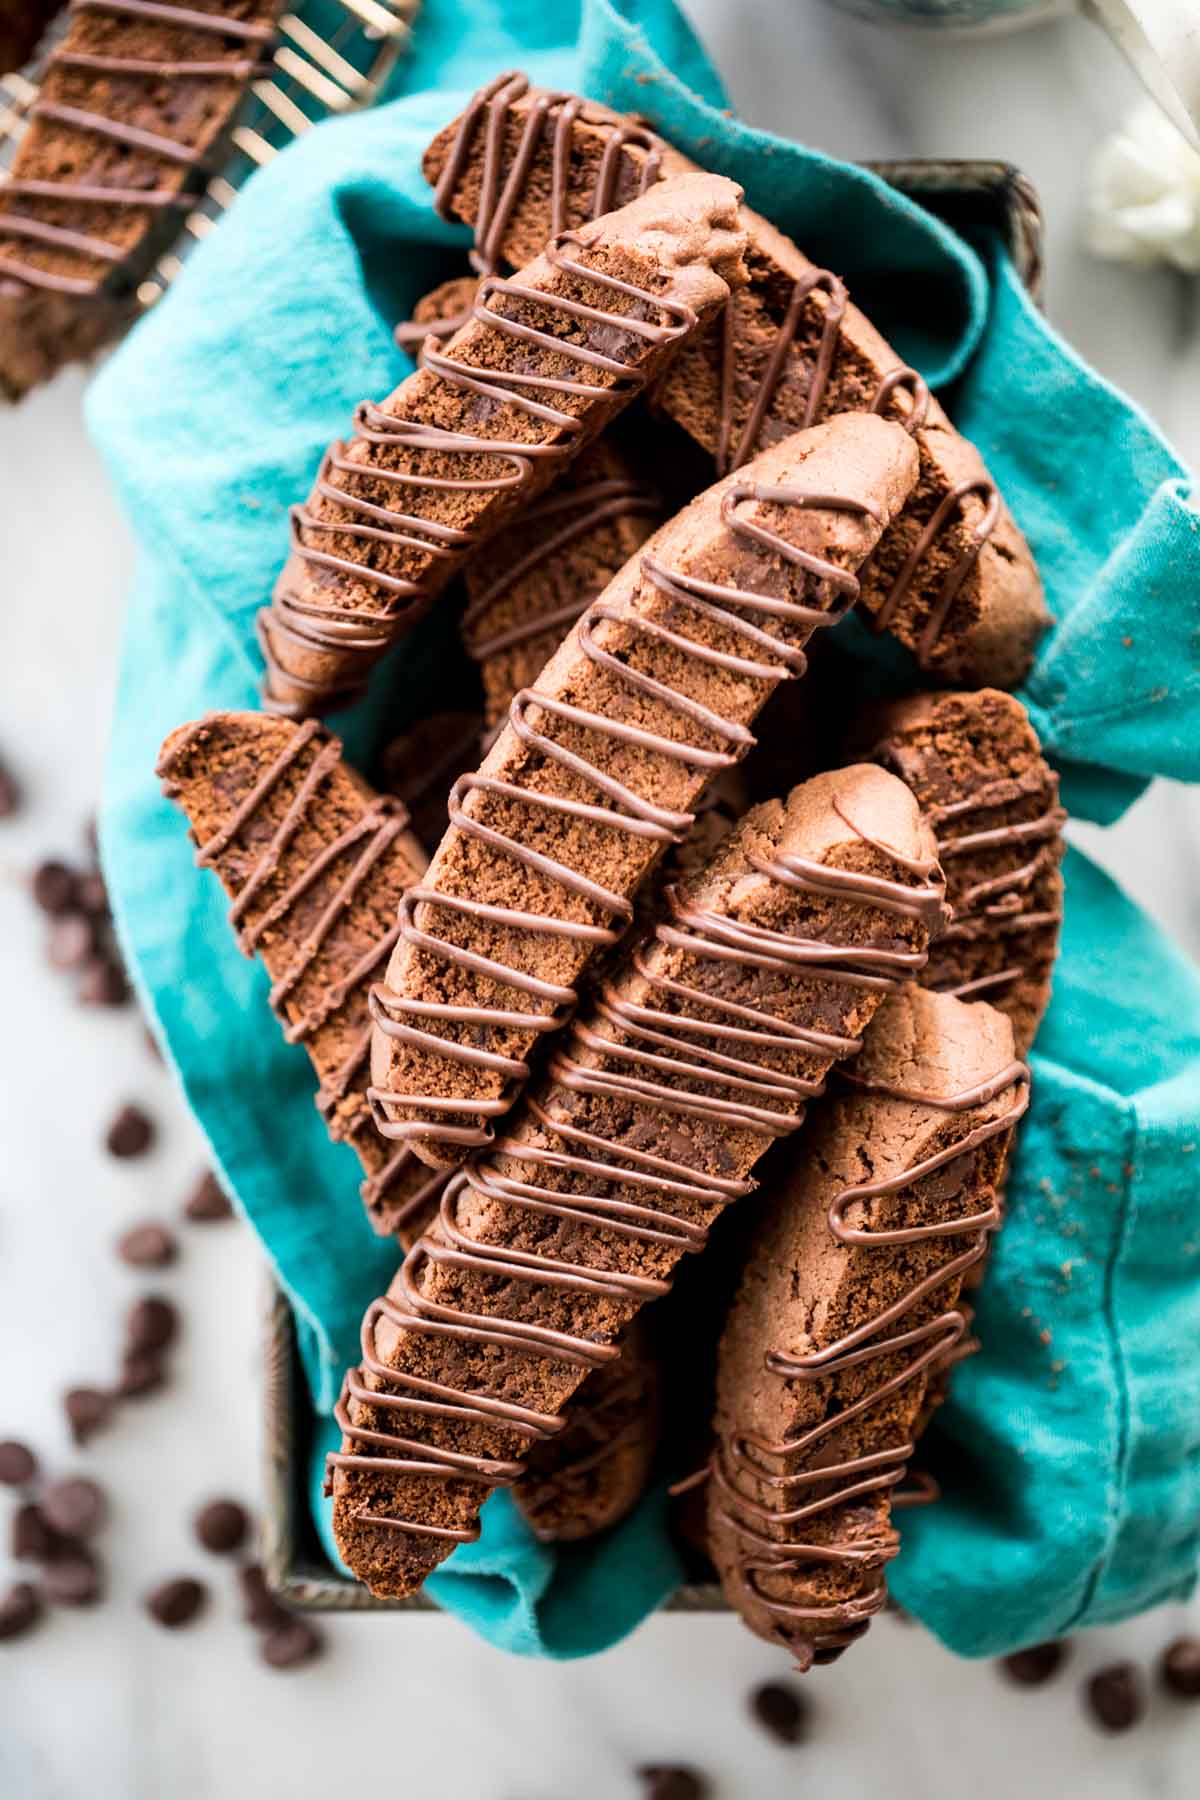 overhead view of chocolate drizzled chocolate biscotti cookies arrange on a teal towel